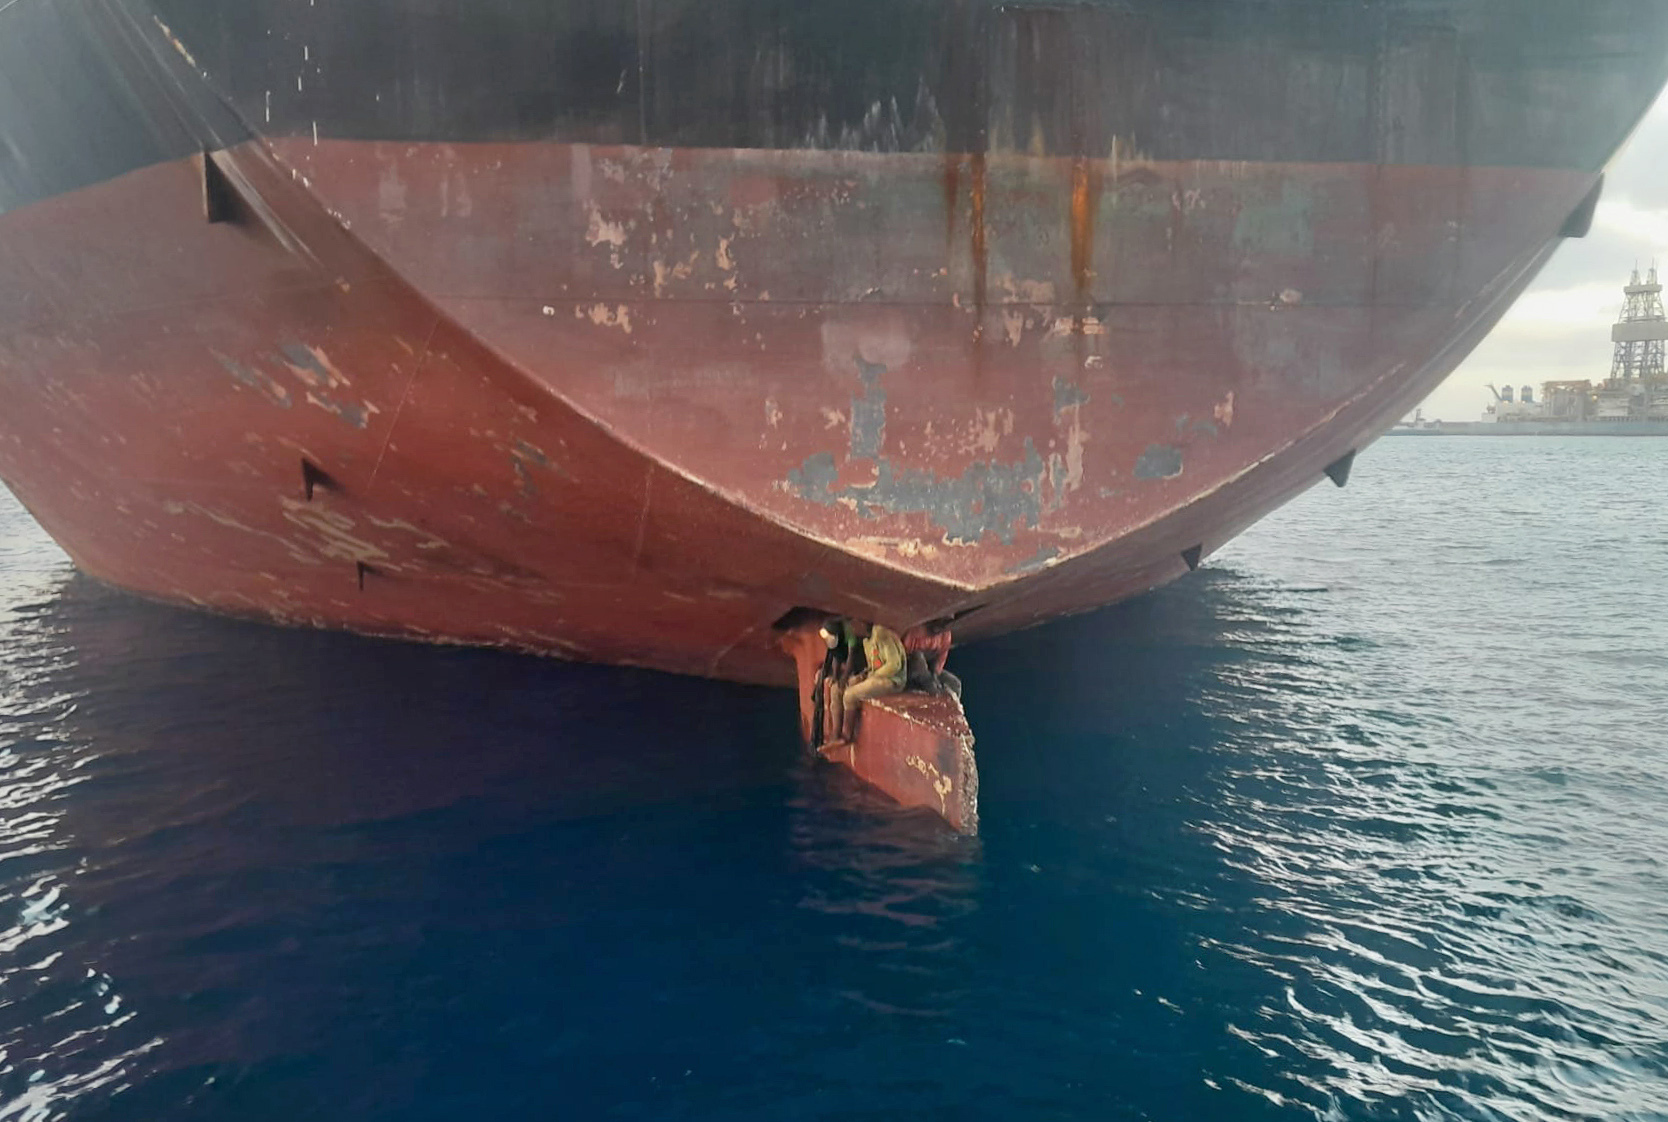 Stowaways travel the Atlantic perched on an oil tanker's rudder